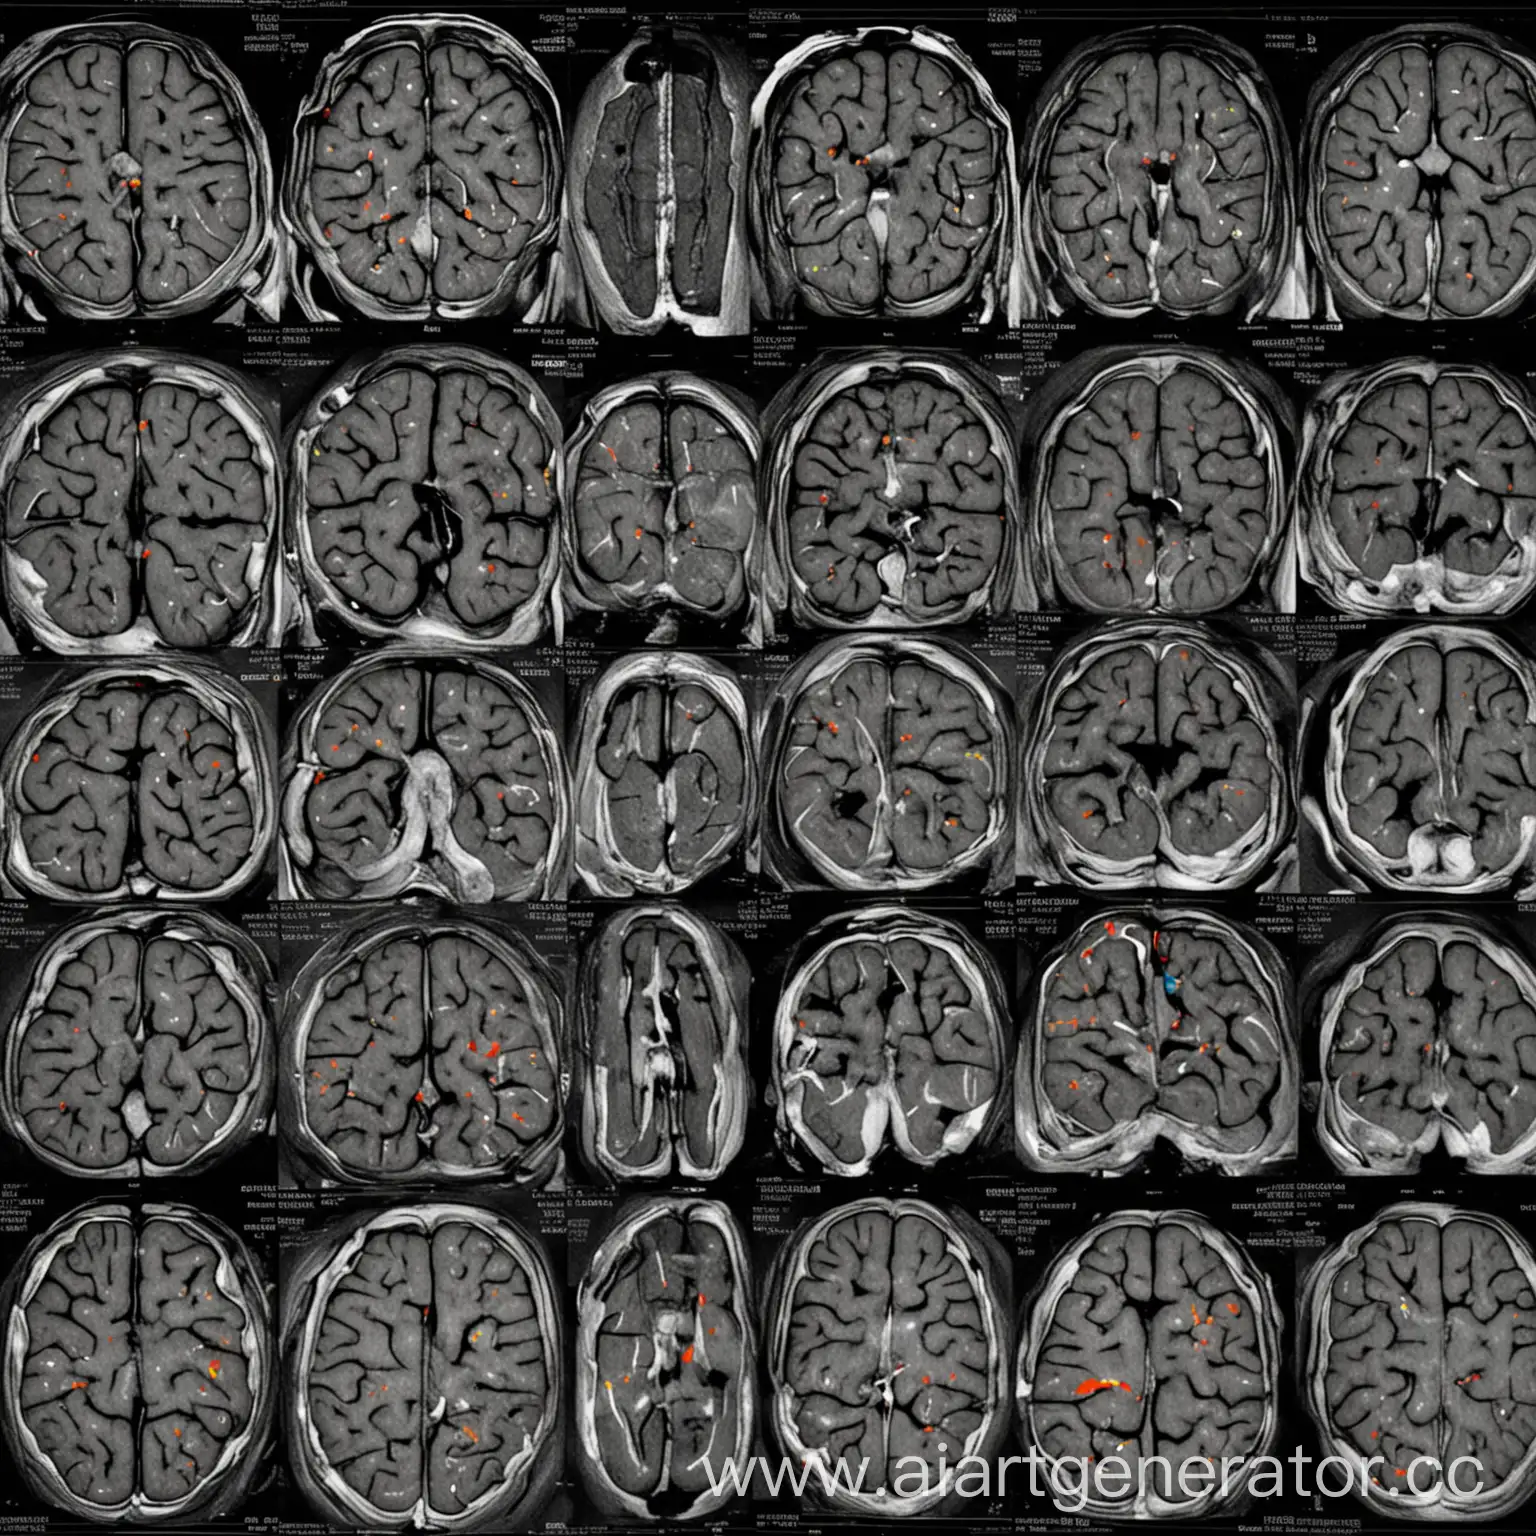 MRT-Brain-Scan-Showing-Healthy-Regions-from-Various-Angles